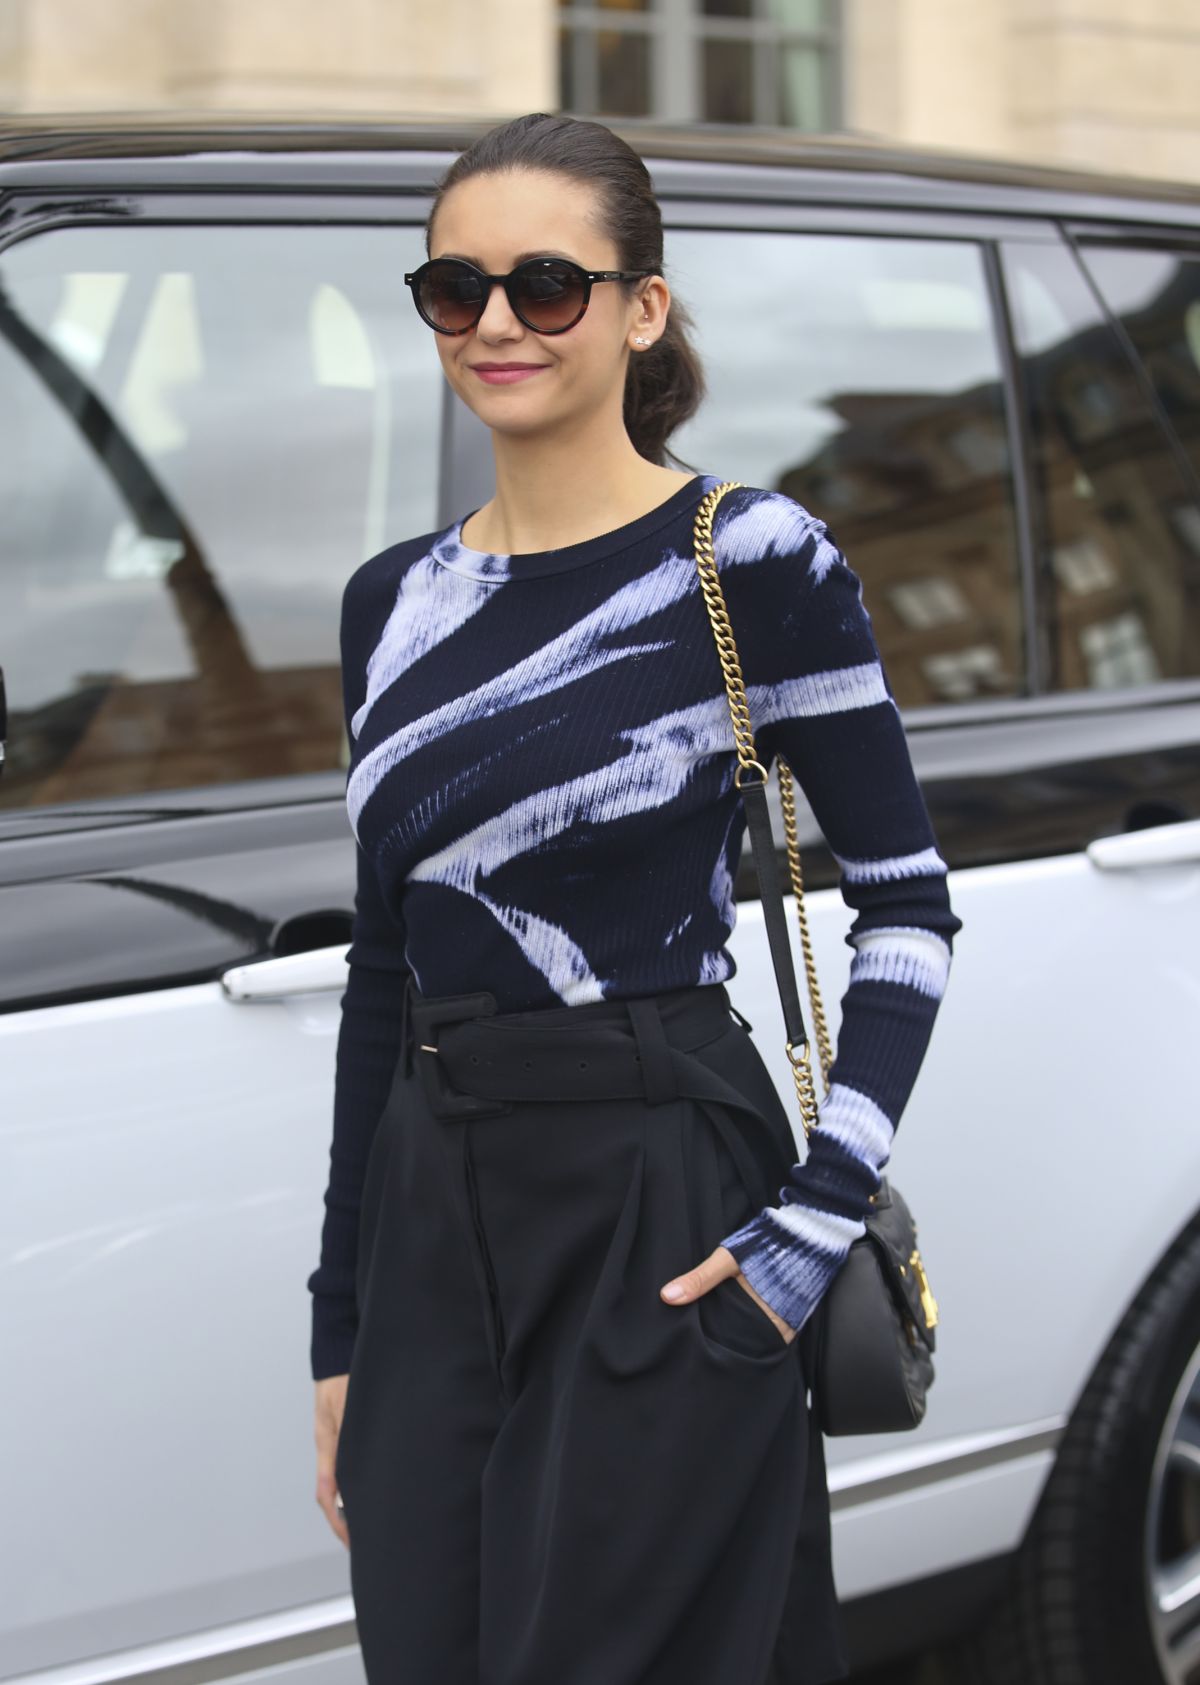 NINA DOBREV Out and About in Paris 03/05/2019 – HawtCelebs